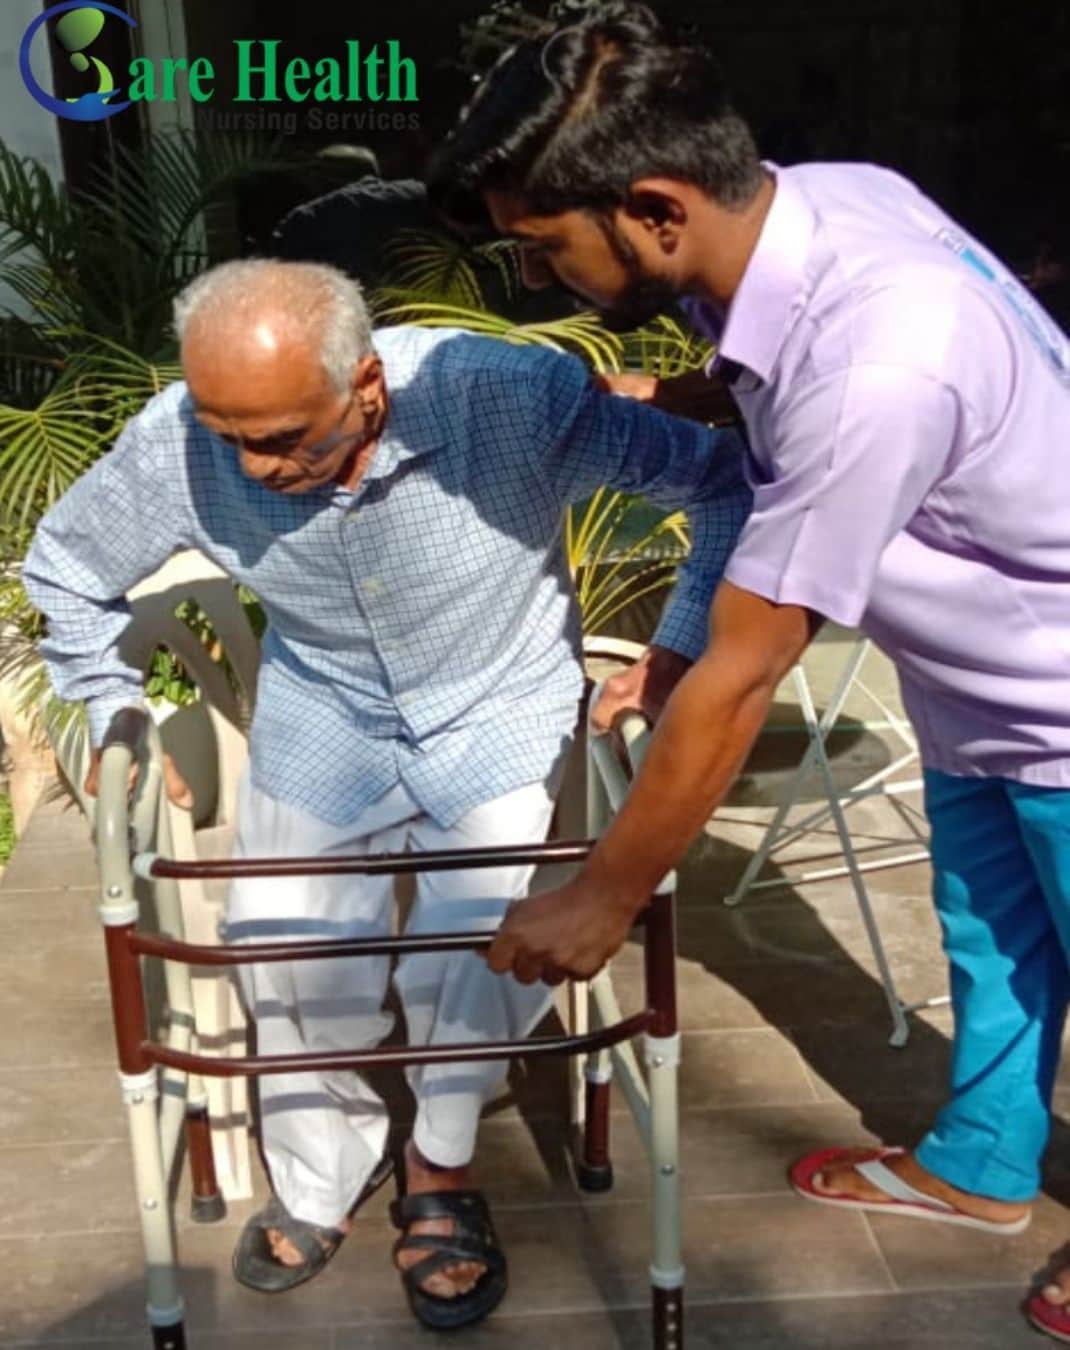 Paralysis patient care at home with Best Patient Care Services in Delhi NCR i.e Care health nurses pvt. ltd.